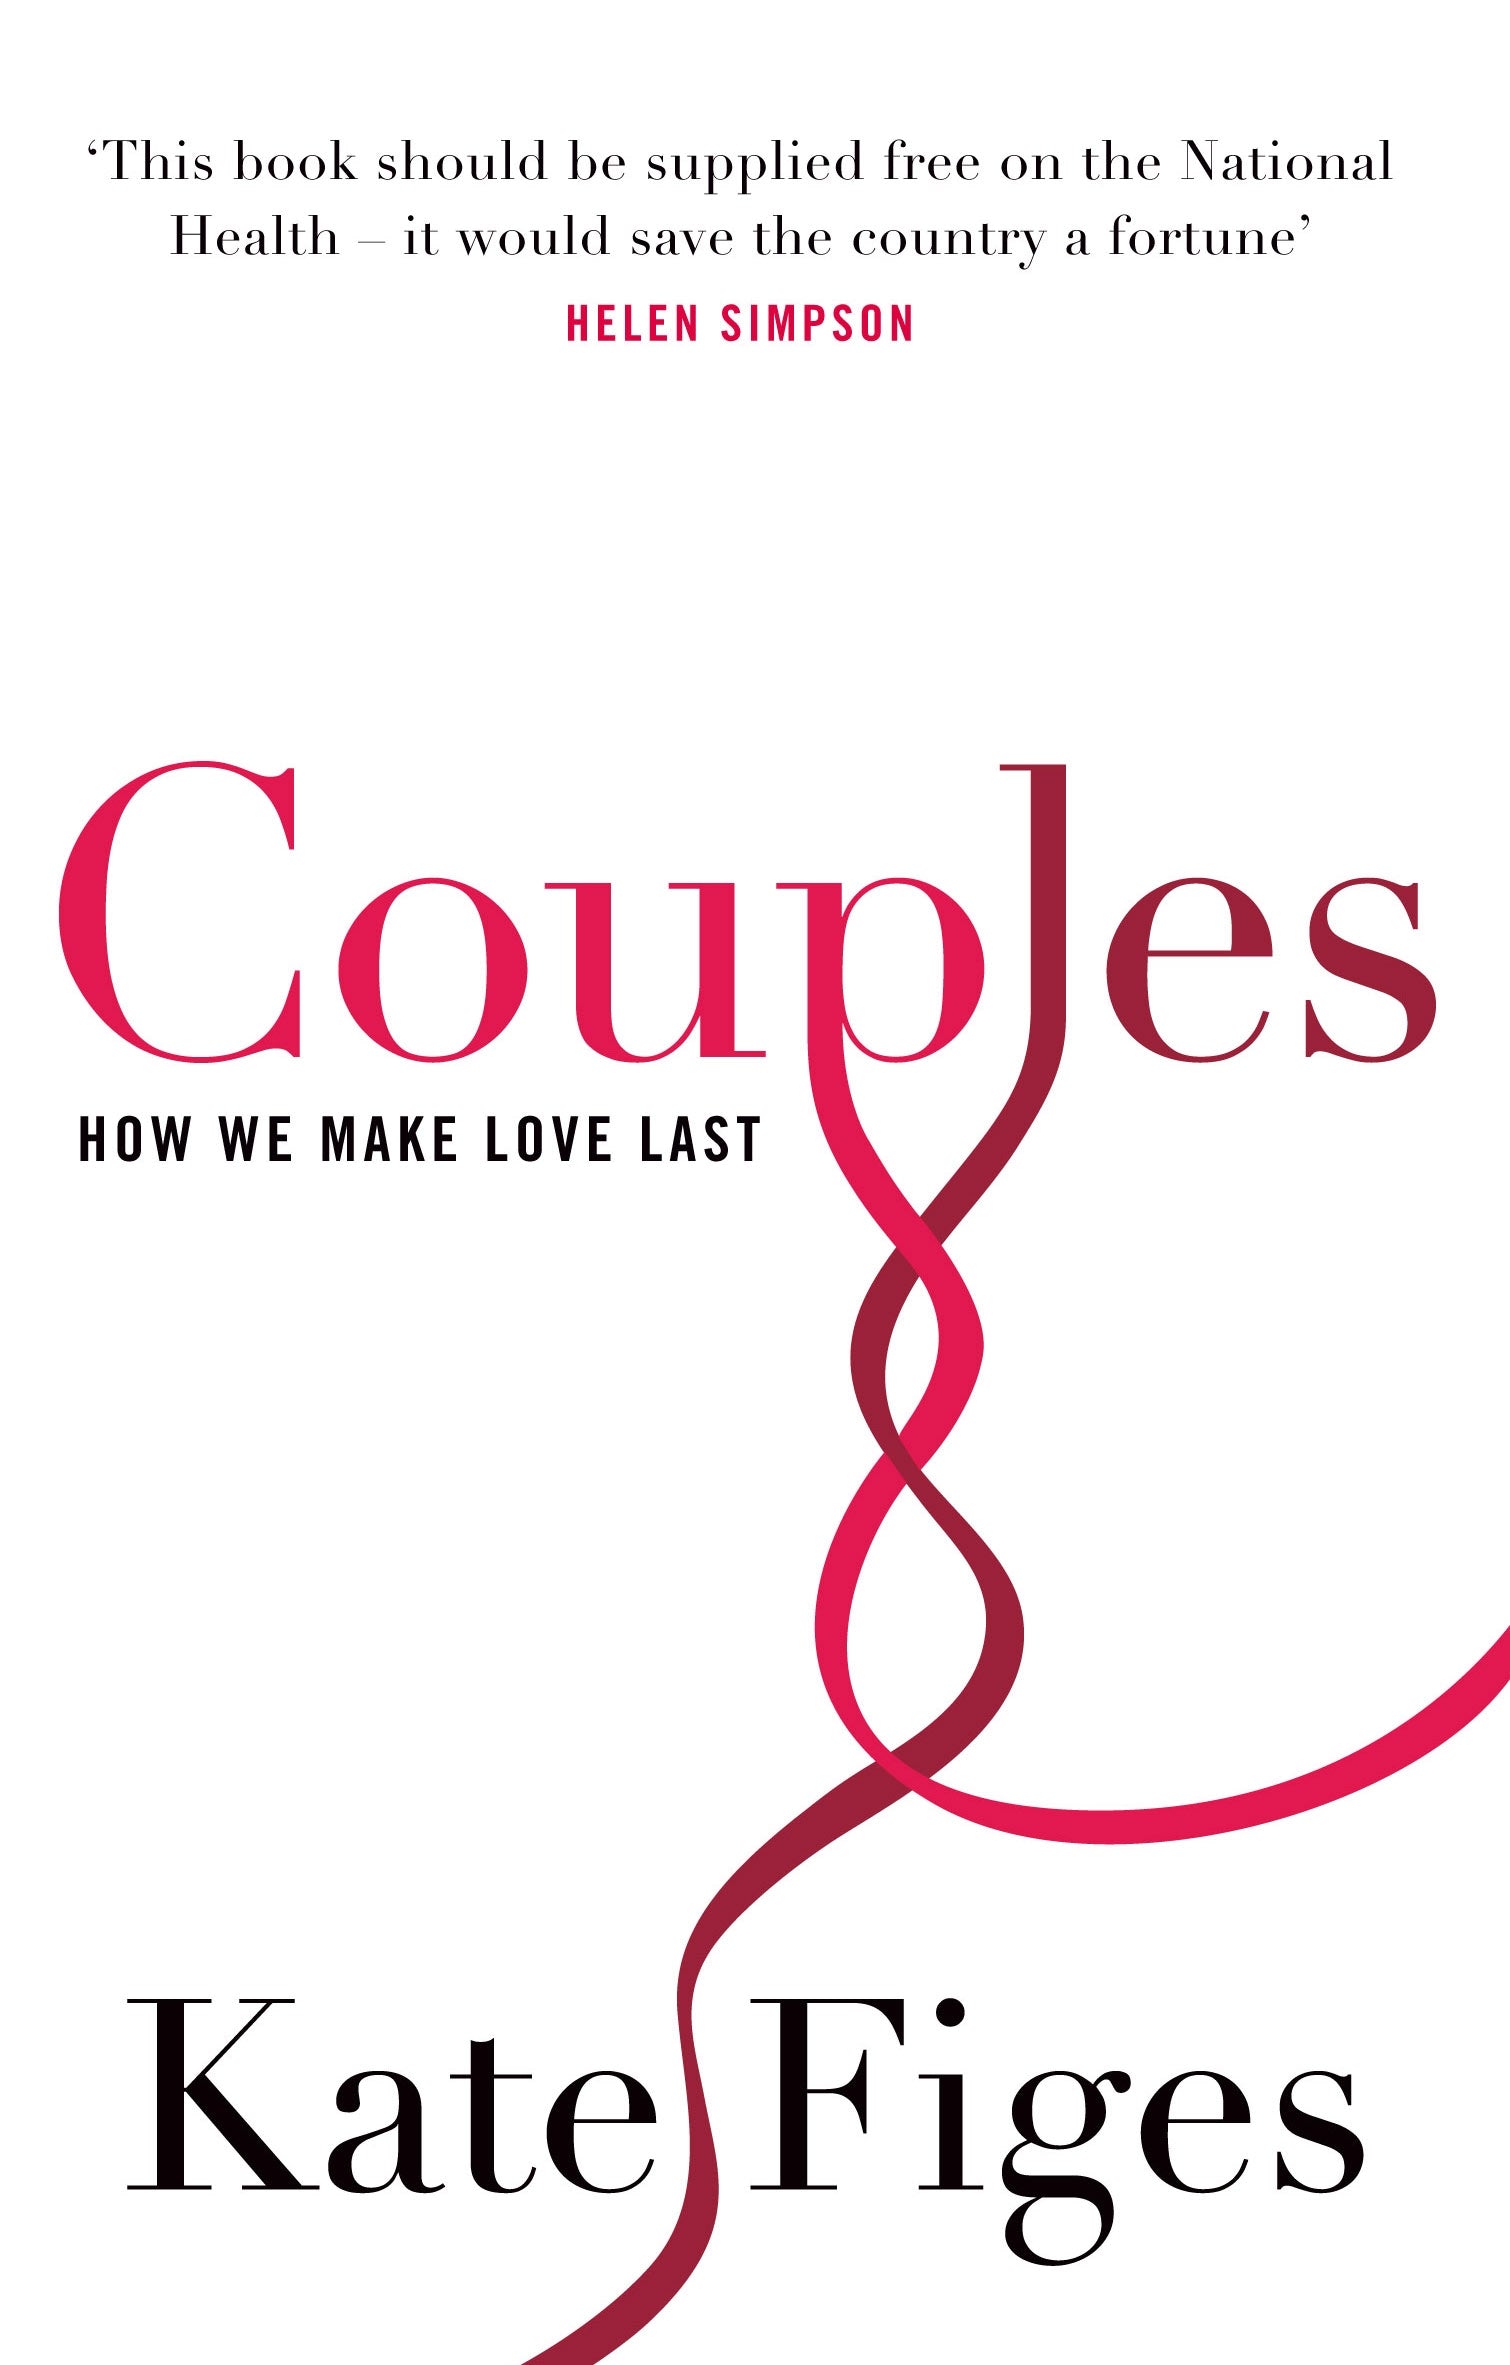 Couples by Kate Figes